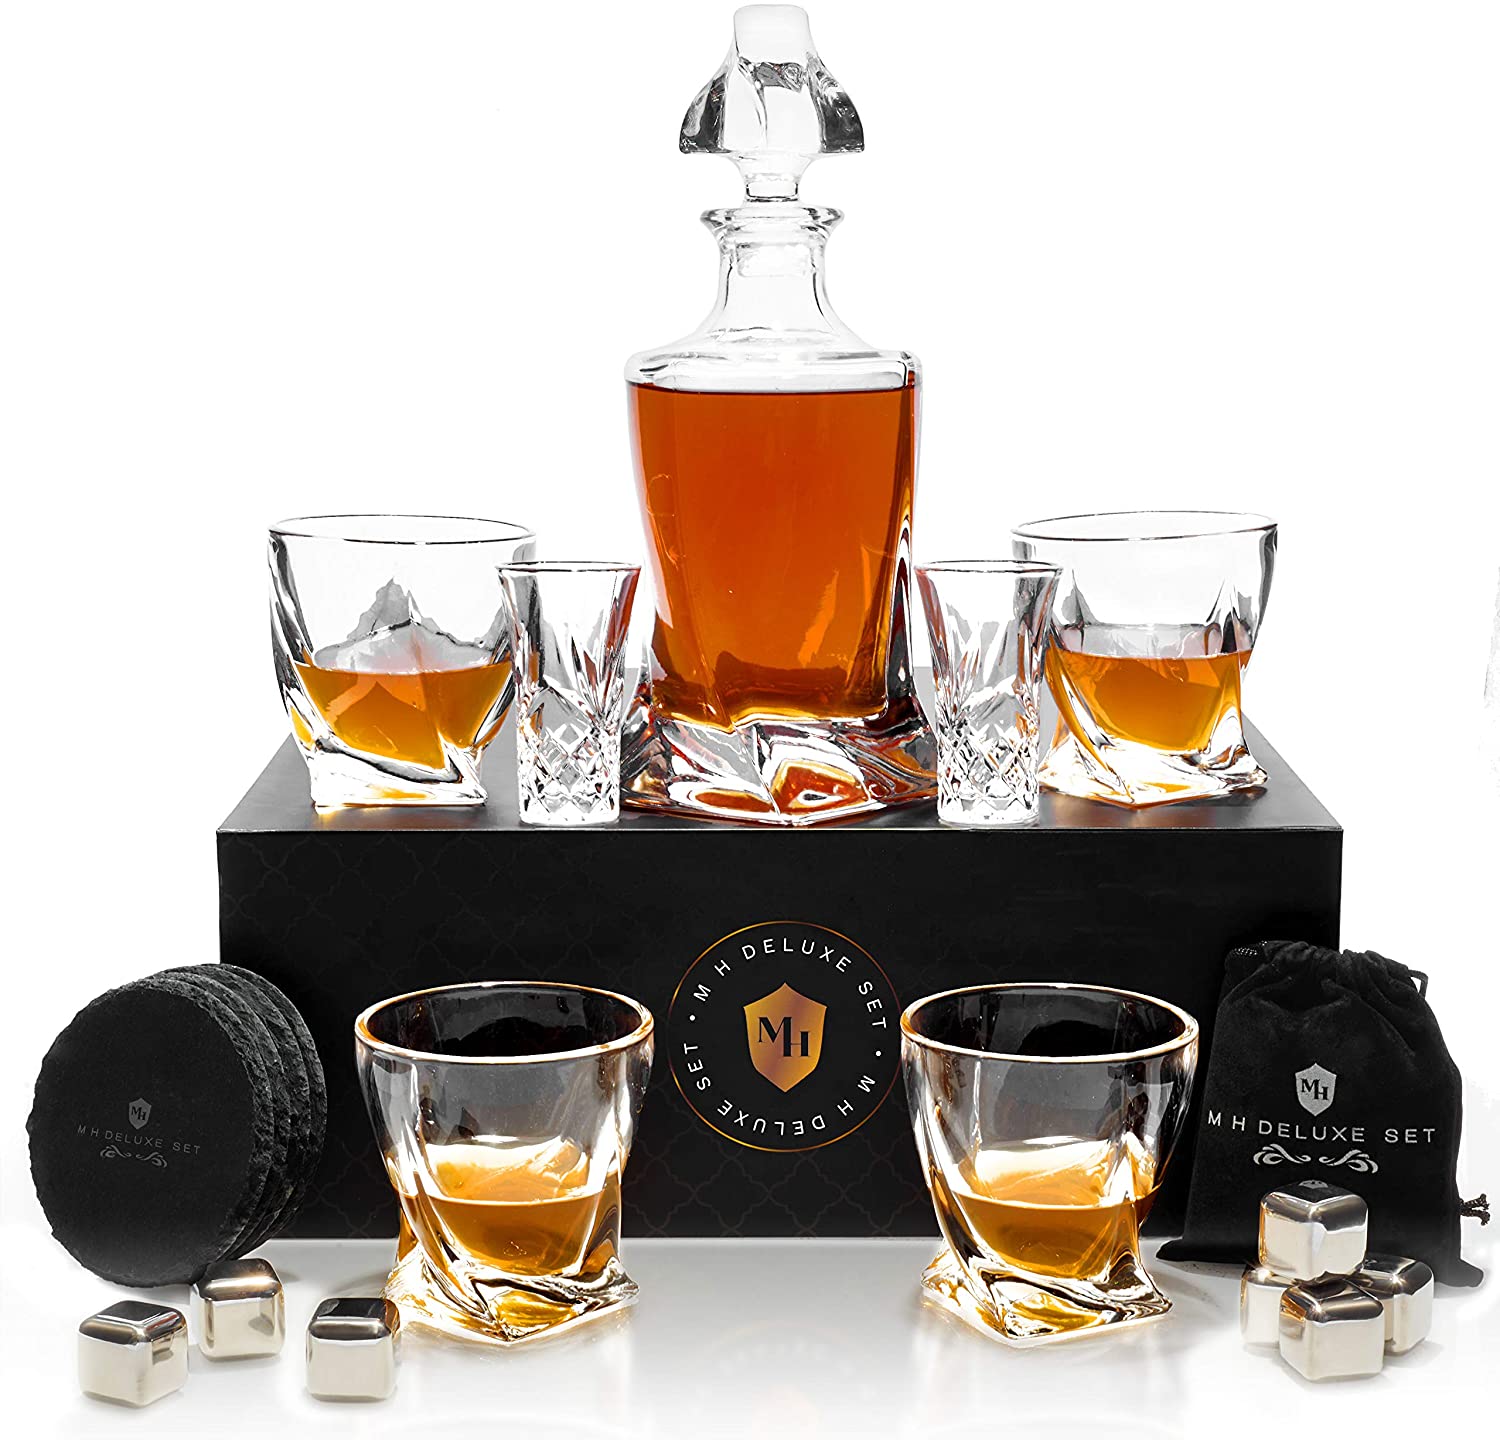 Low MOQ for Metal Bullet Ice Cube -  No Lead Crystal Whiskey Decanter with classic Whiskey Glasses whiskey stone set  in Unique Stylish Gift Box – Shunstone